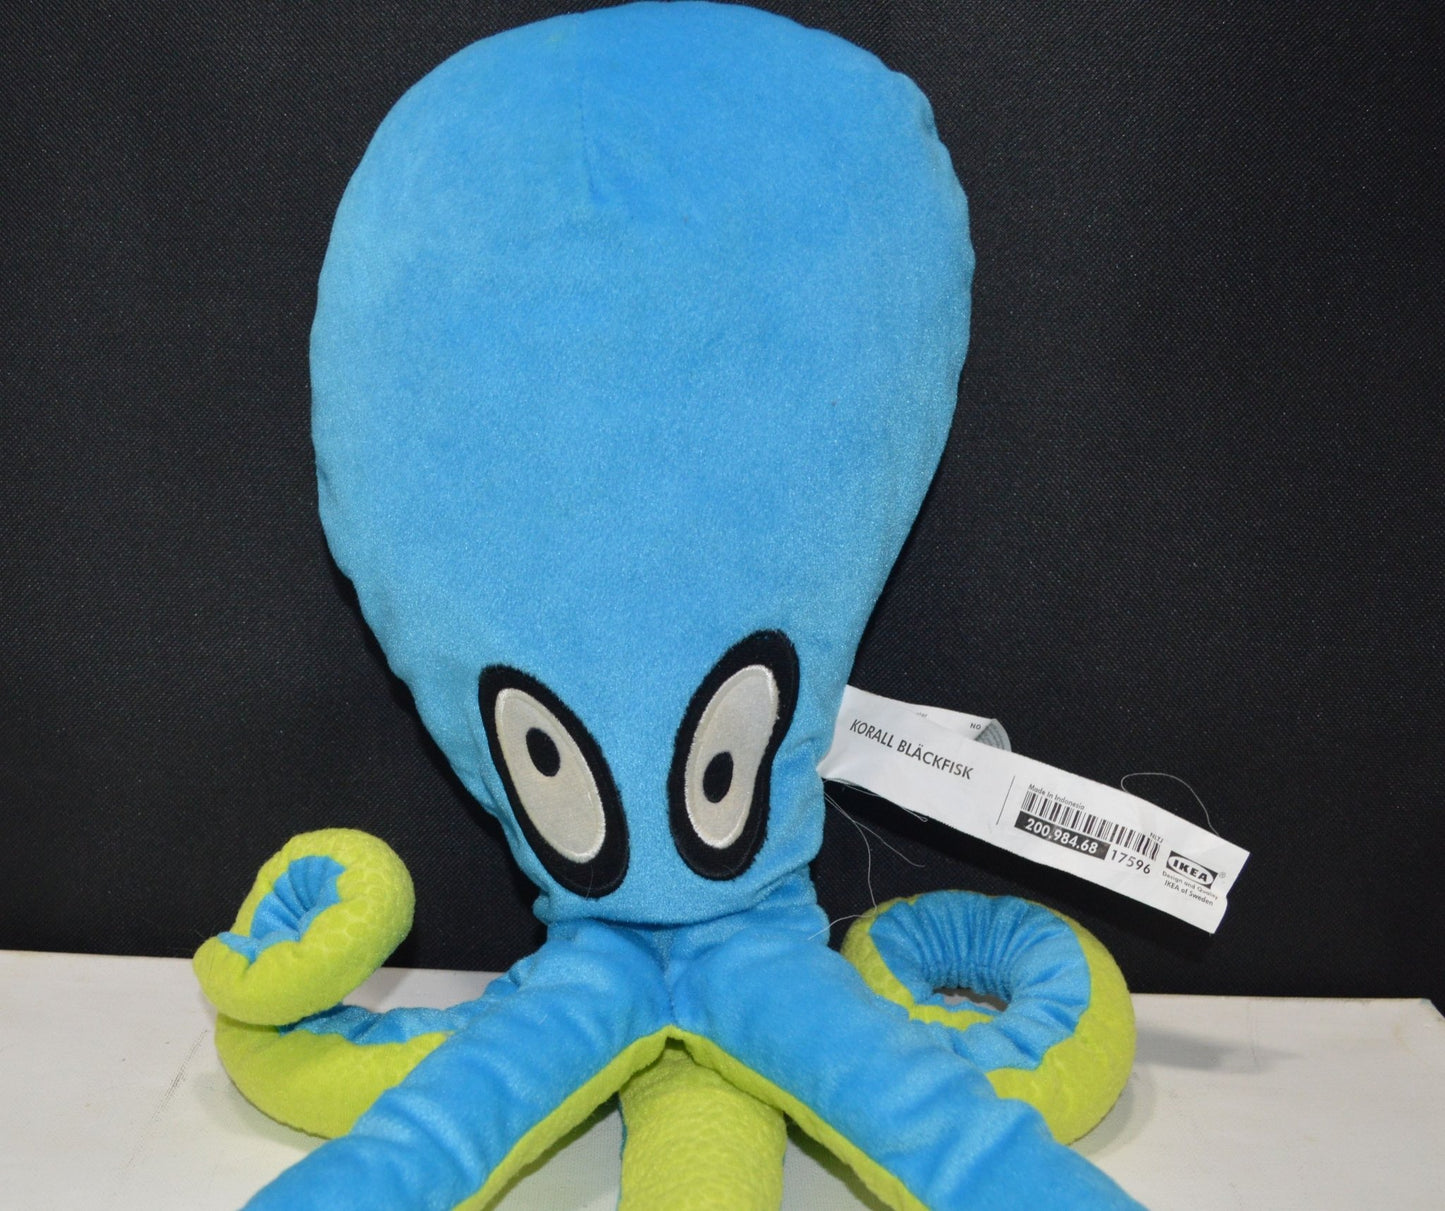 IKEA KORALL BLACKFISK BLUE AND GREEN SOFT TOY SQUID(PREVIOUSLY OWNED) GOOD CONDITION - TMD167207